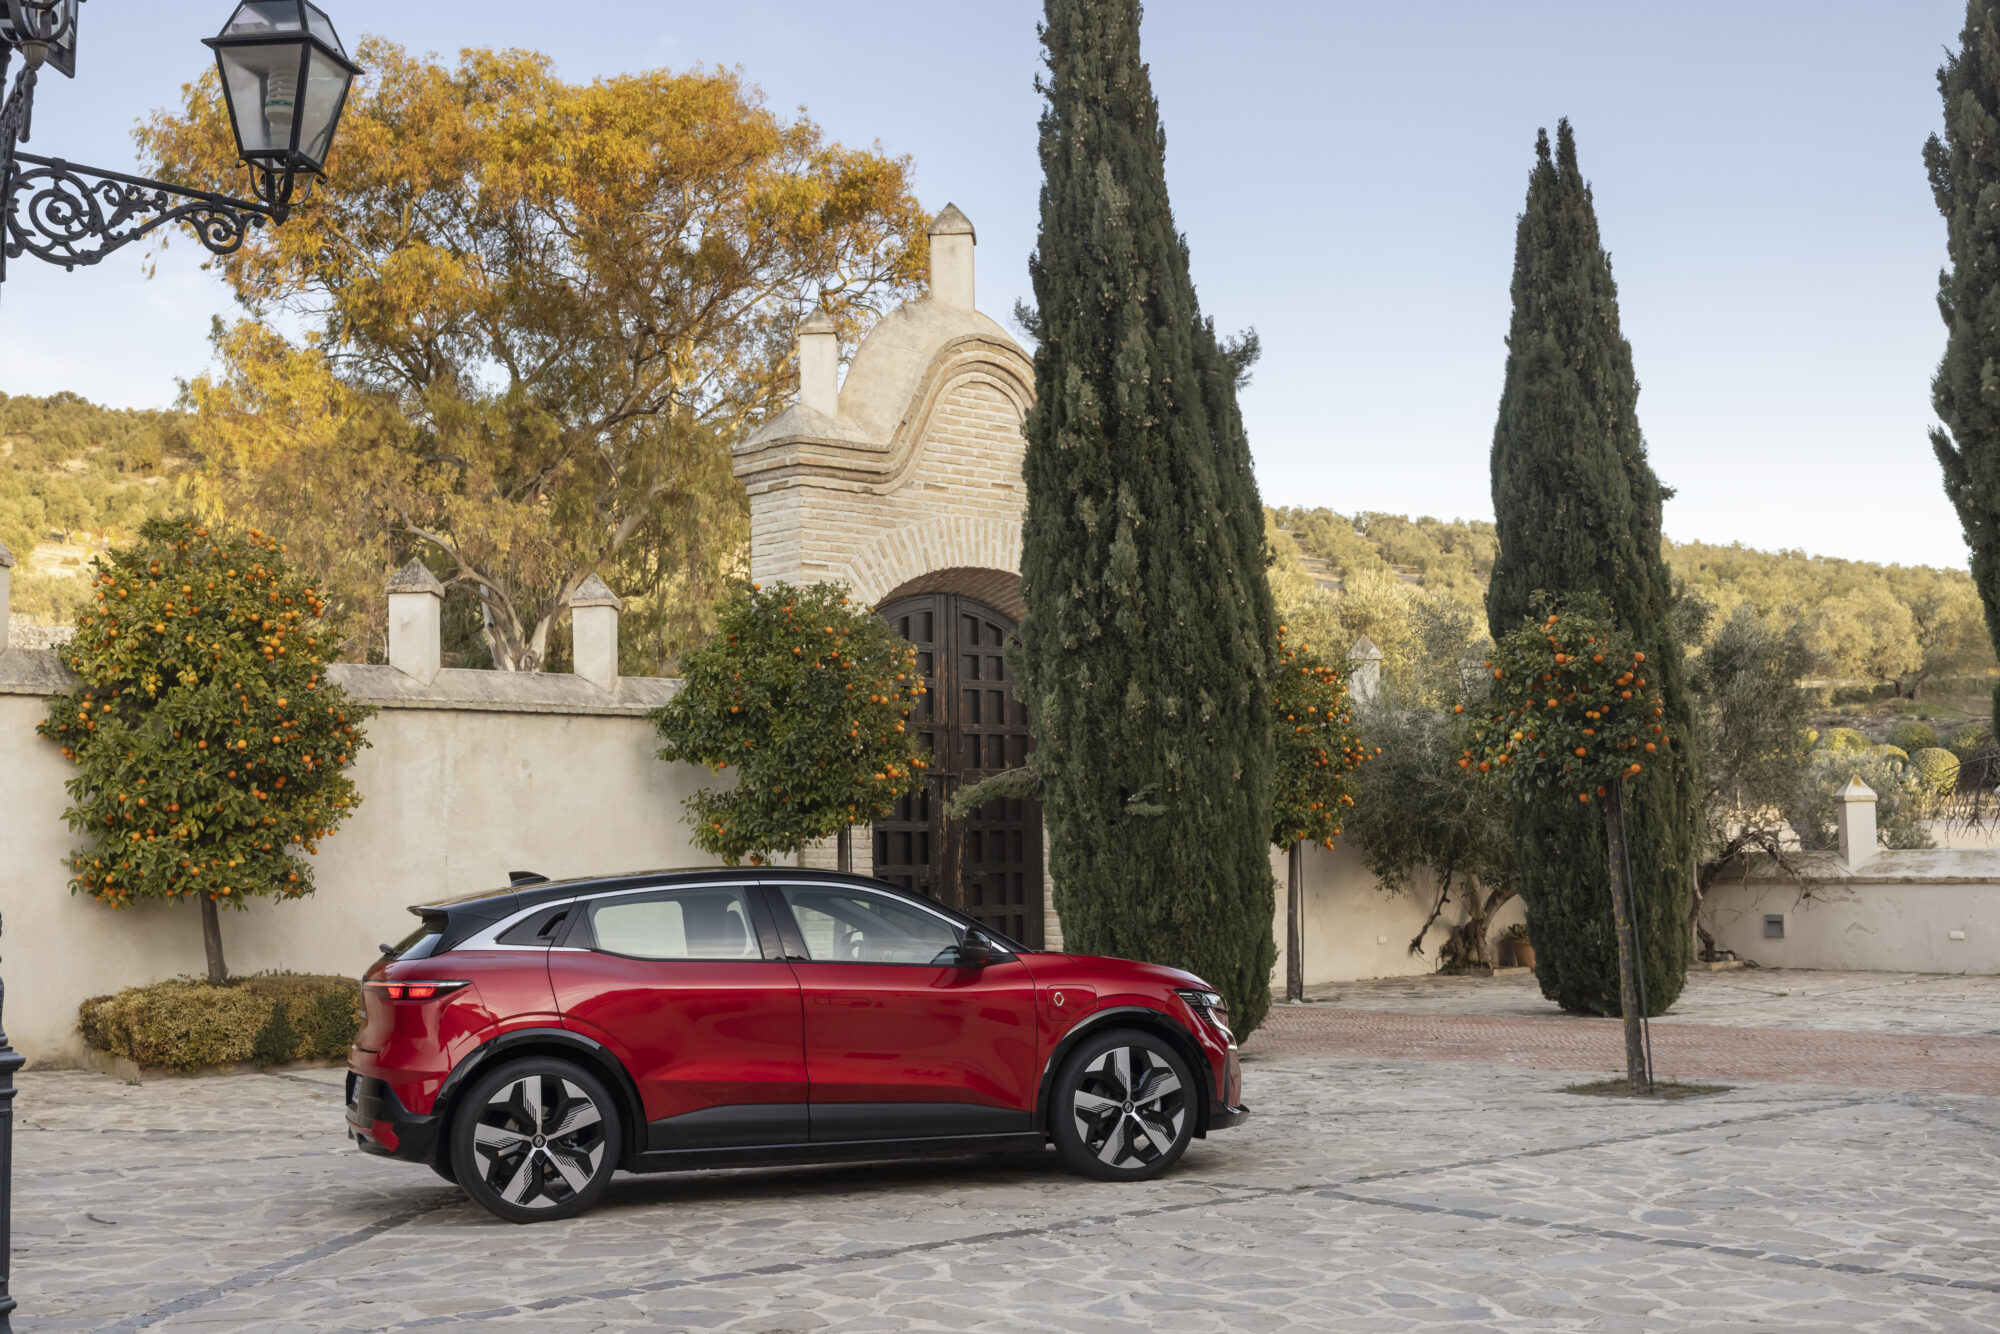 All-New Renault MEGANE E-TECH Electric - Techno version - Flame Red - Drive tests